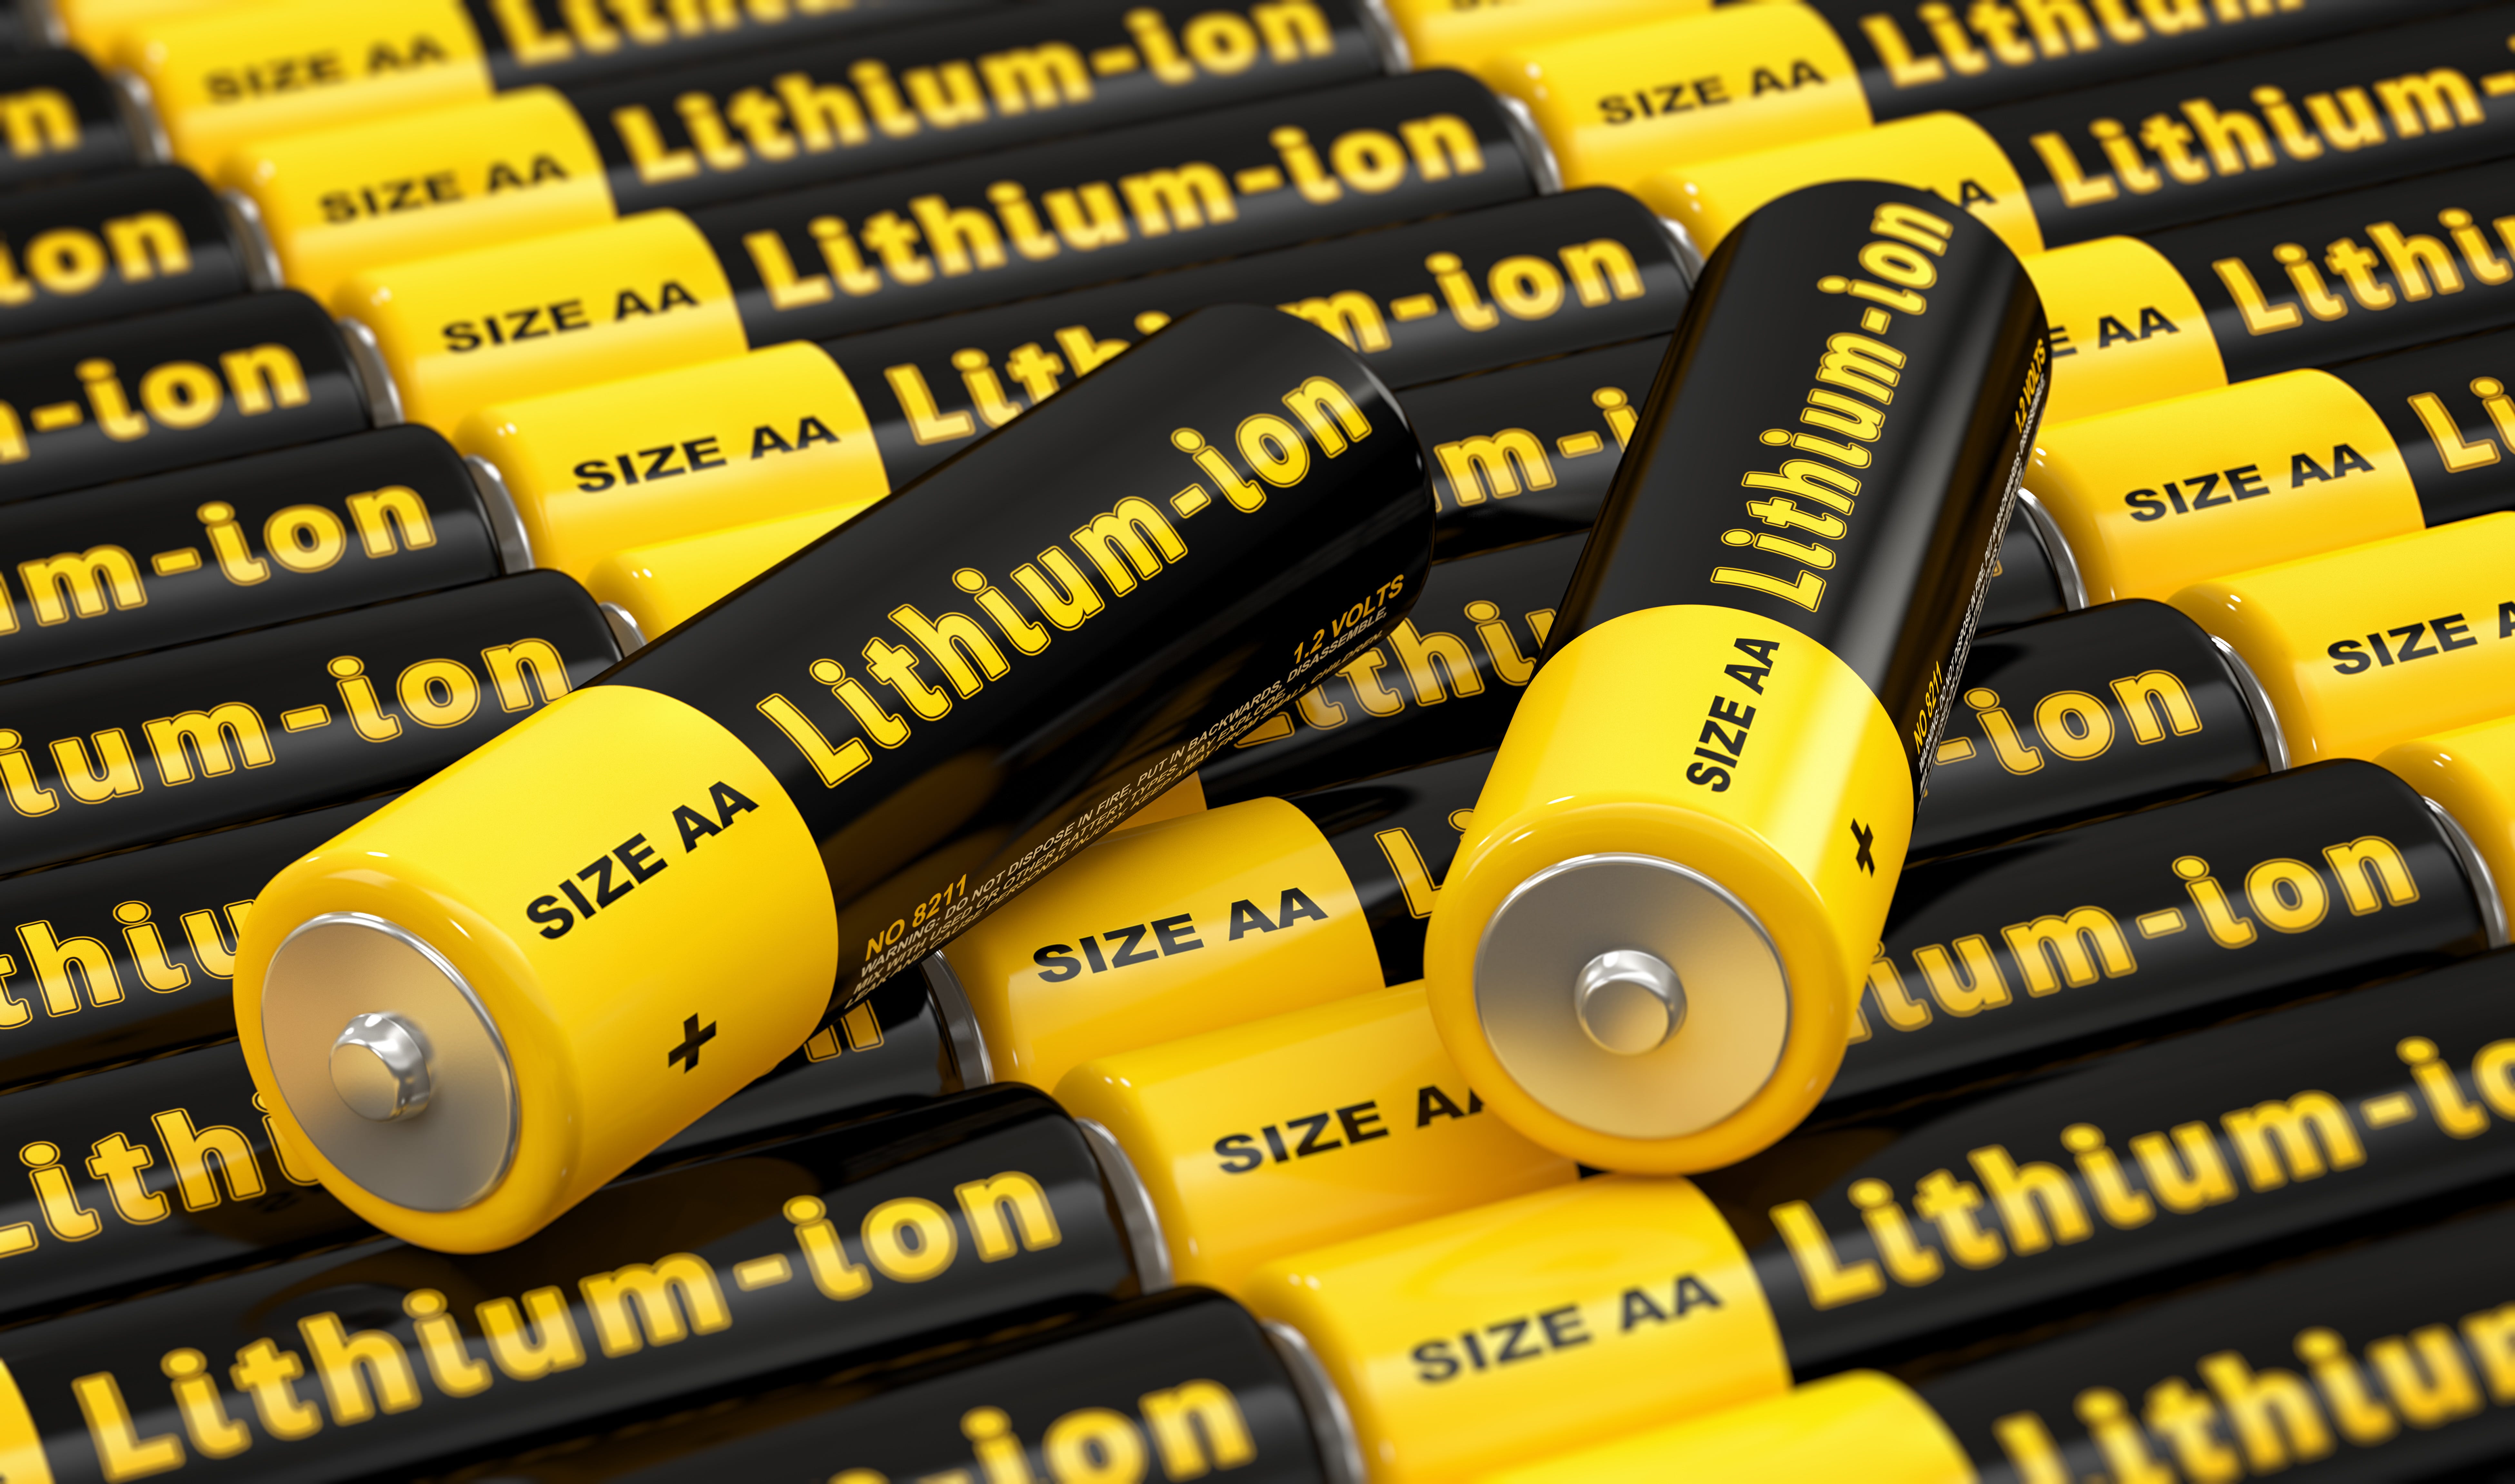 A primer on lithium-ion batteries: how they work and how they are changing